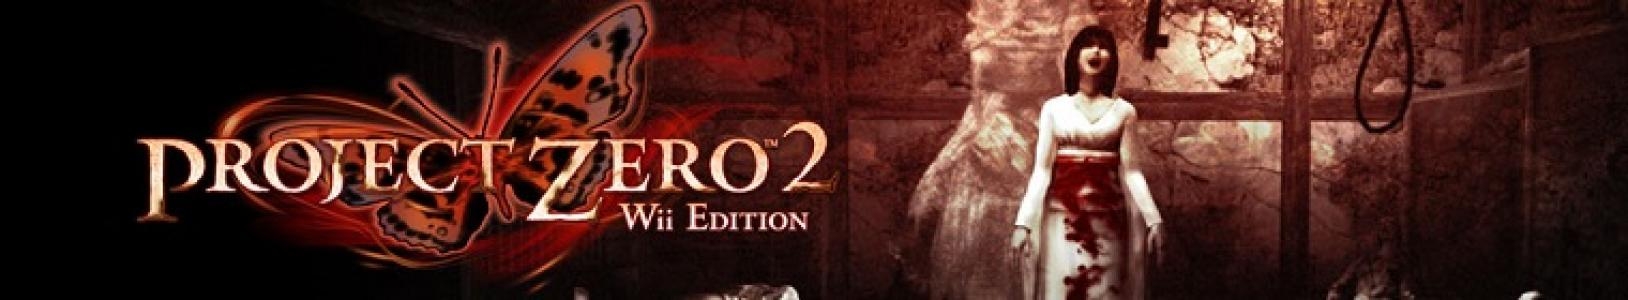 Project Zero 2: Wii Edition banner